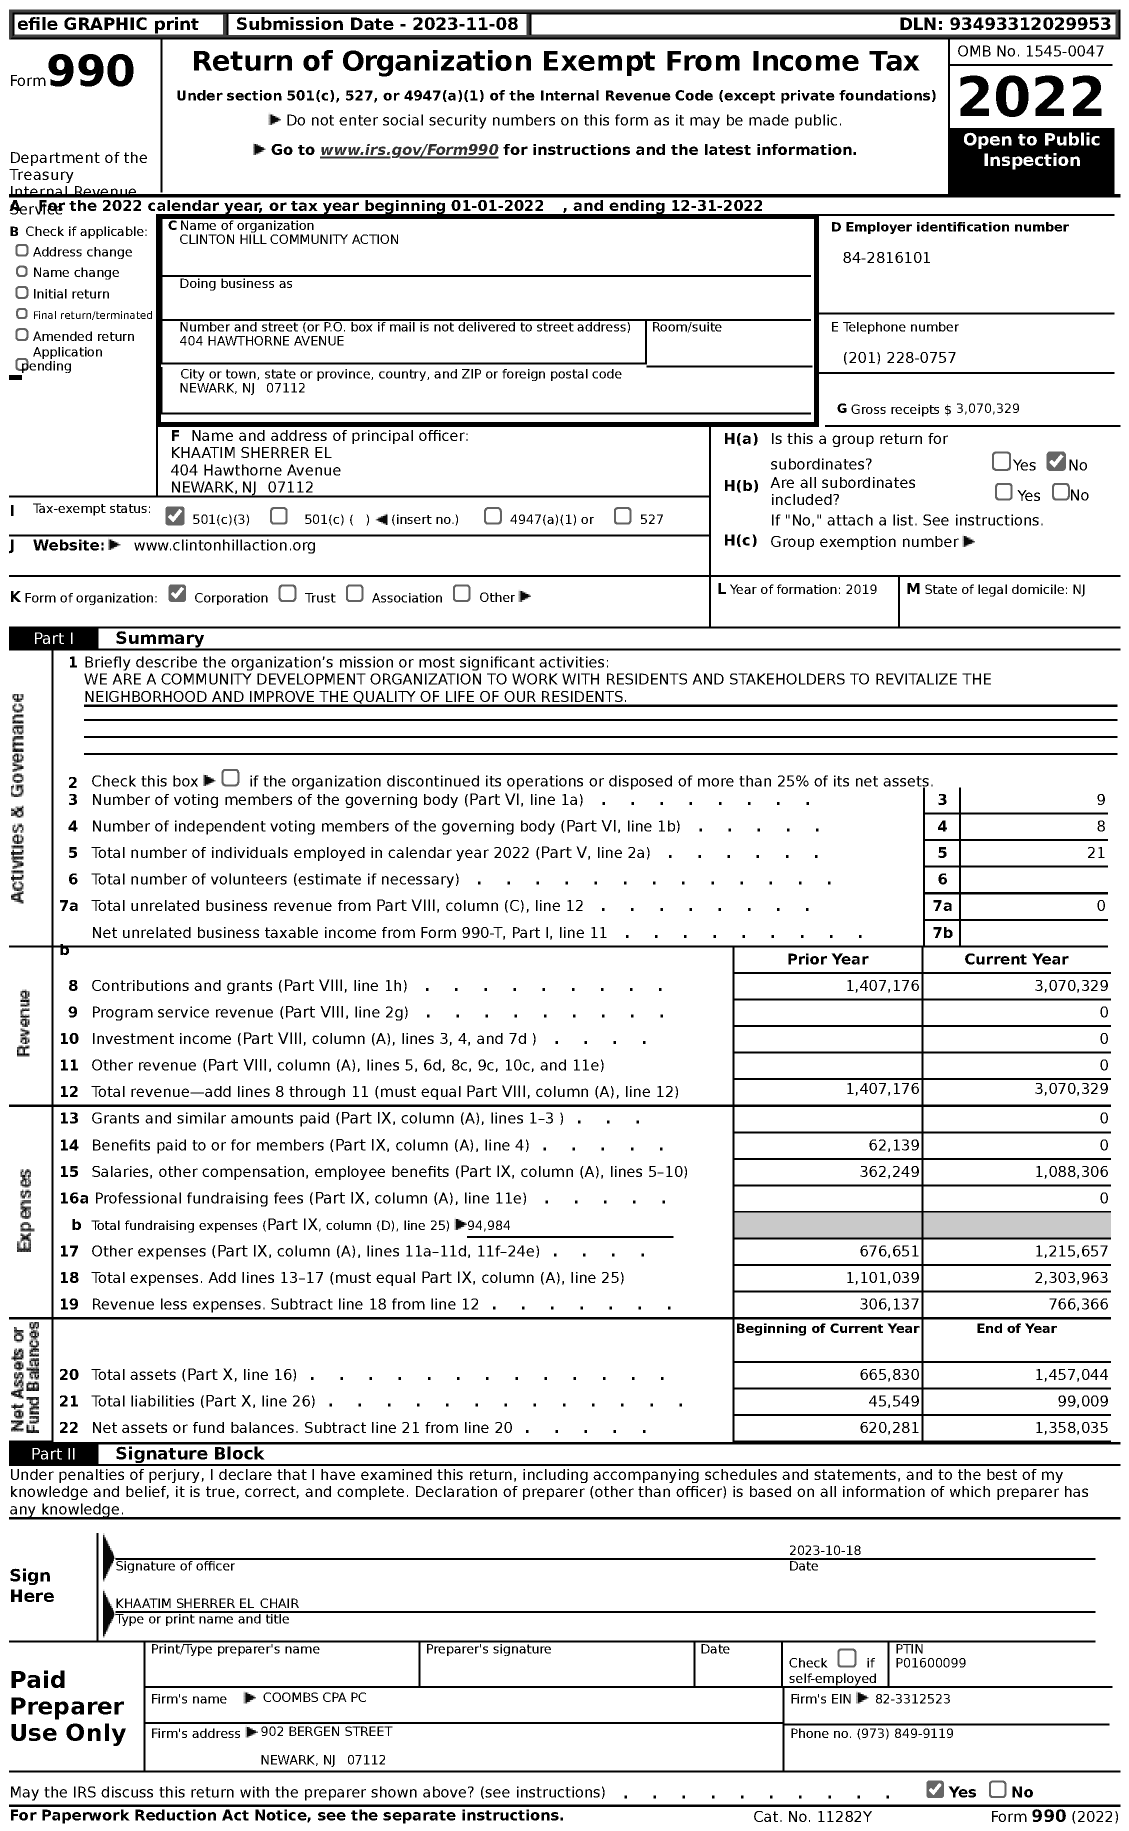 Image of first page of 2022 Form 990 for Clinton Hill Community Action